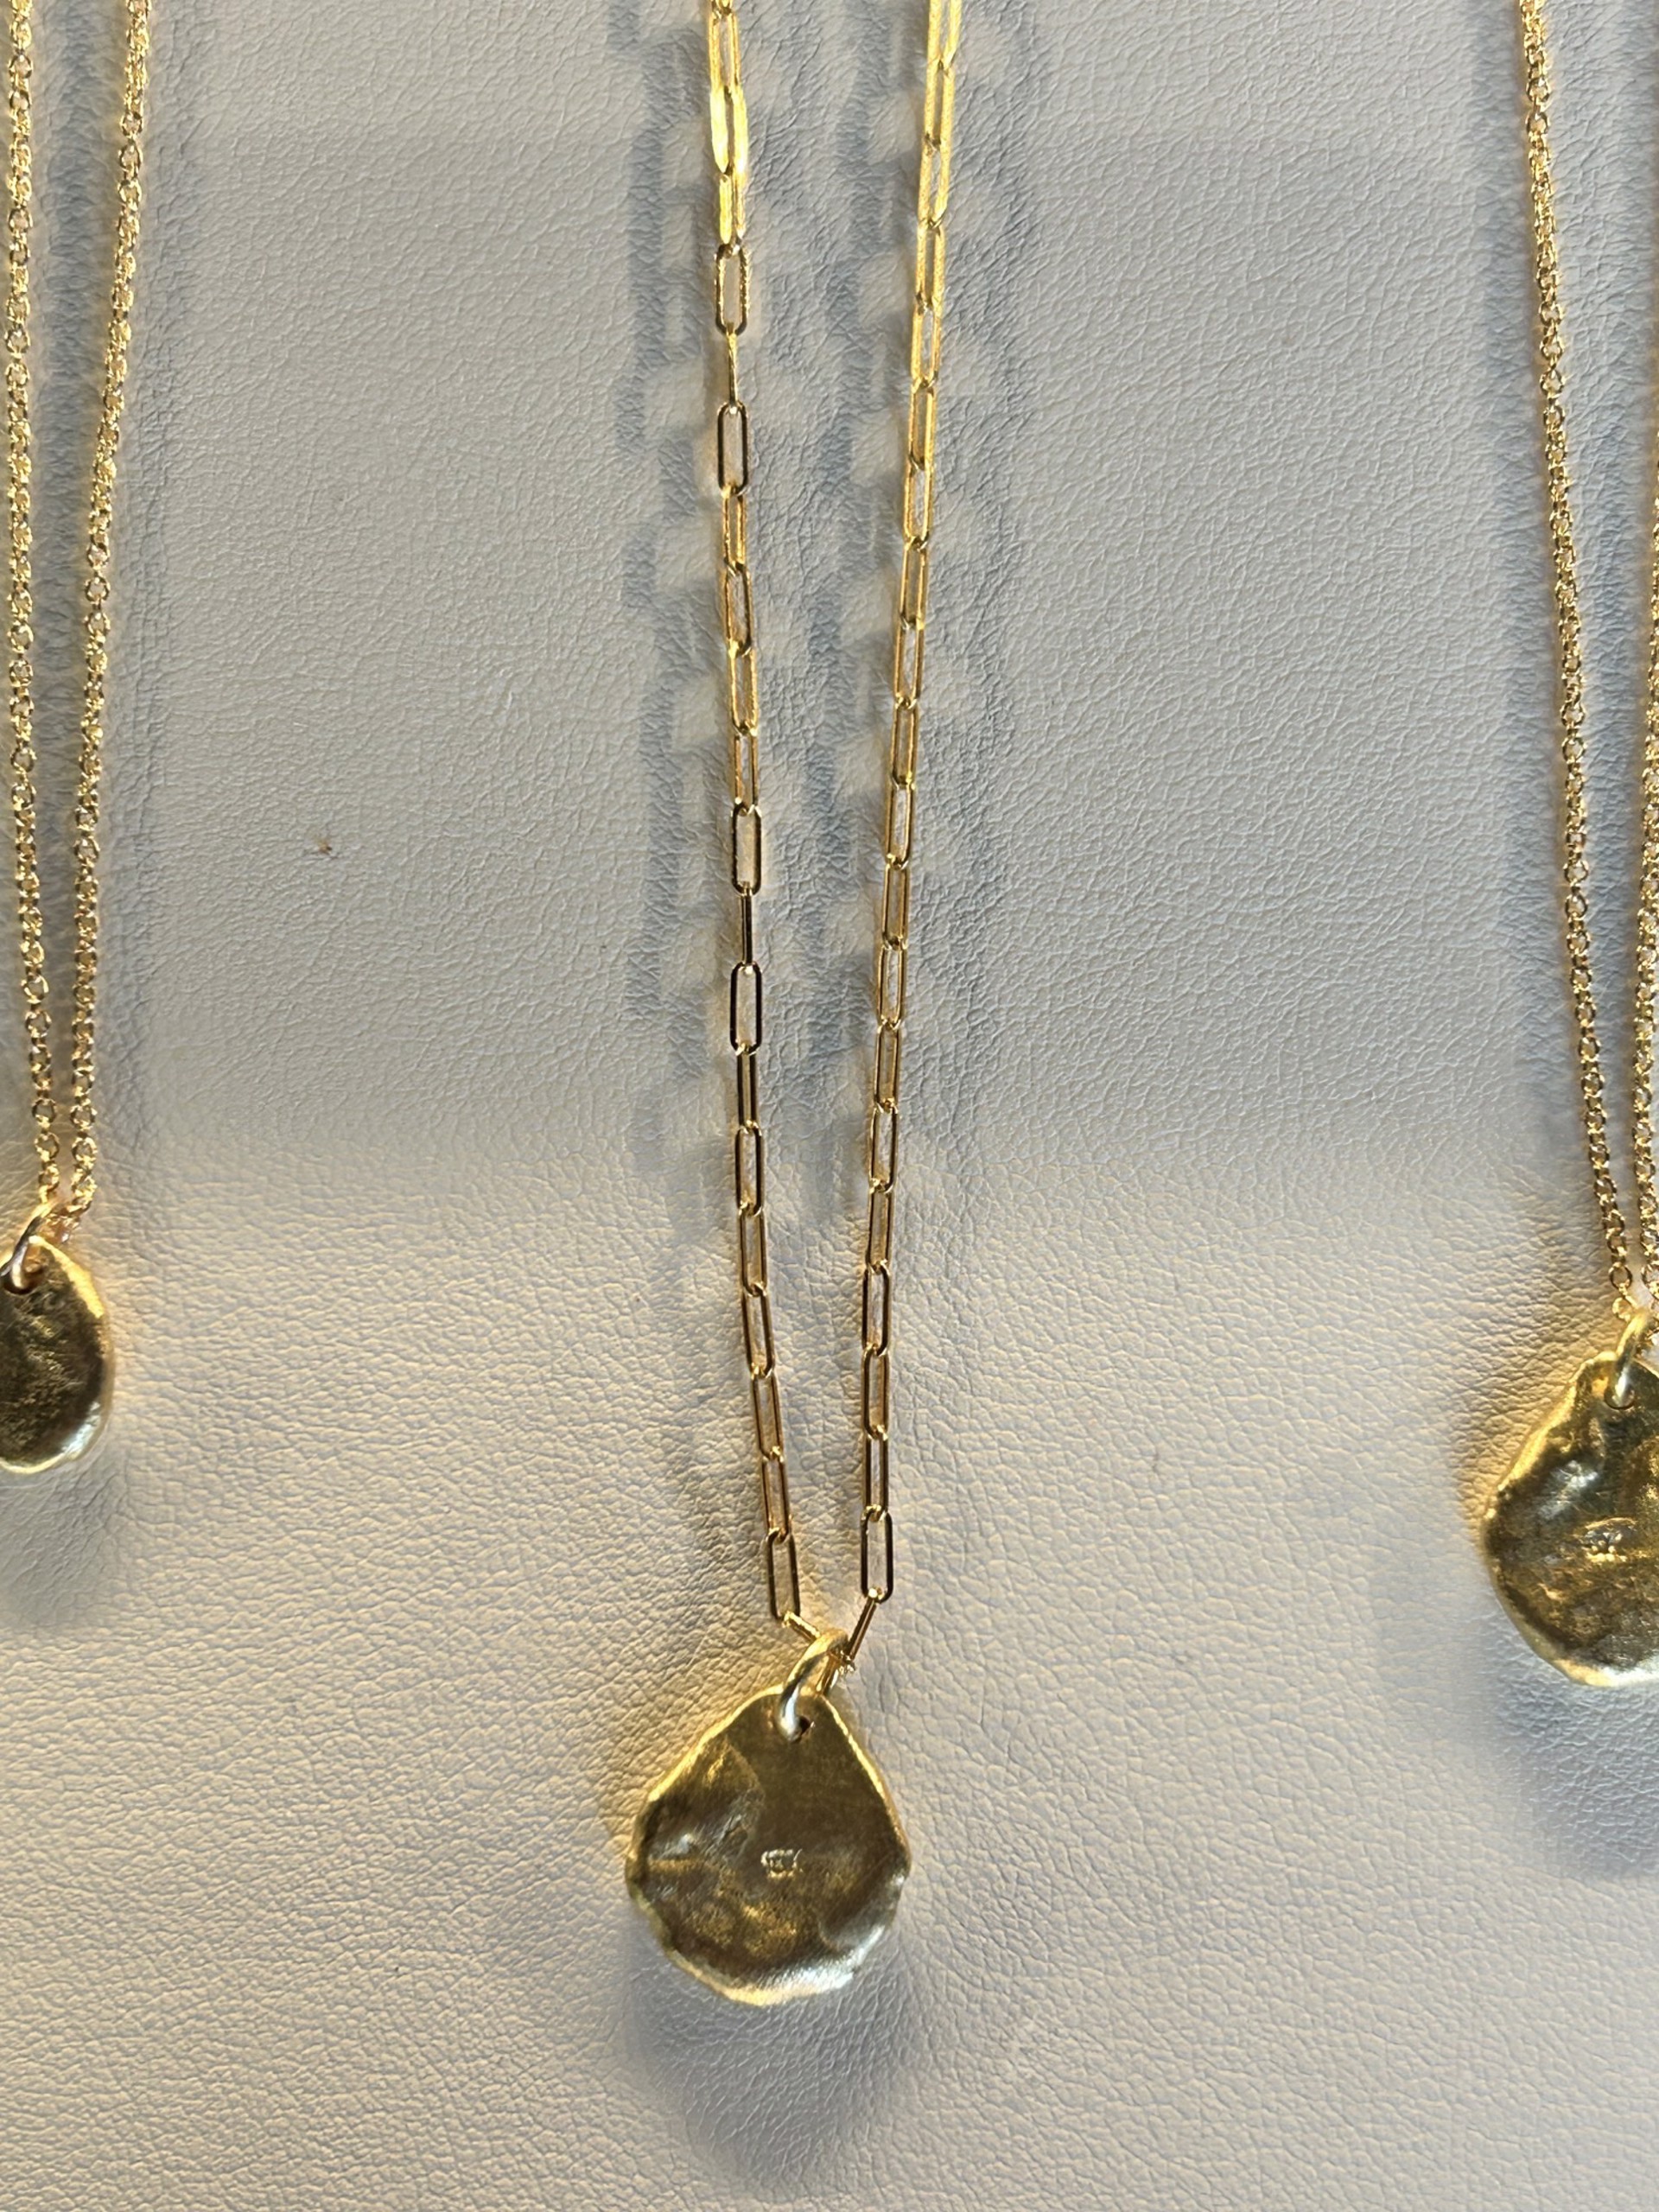 Link Chain and Gold Pendant by Leandra Hill